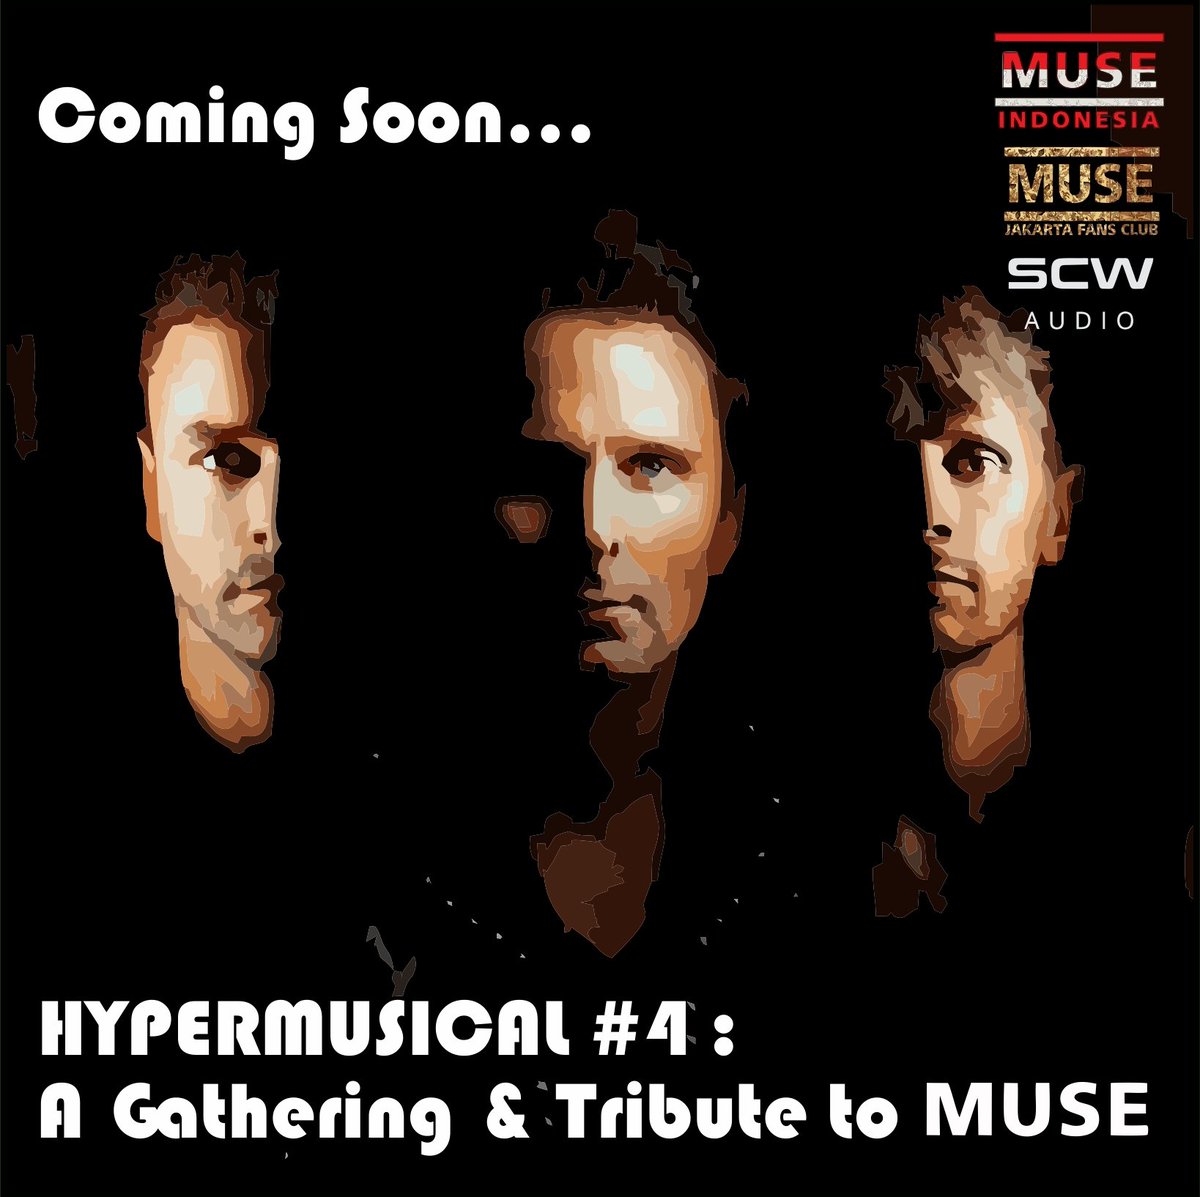 MUSE Jakarta Fans Club on Twitter: "Coming soon... Hypermusical #4 : A and Tribute to @muse Supported by : @muserindonesia #bringmusebacktoindonesia #muse #tributetomuse #mattbellamy #chriswolstenholme #domhoward https://t.co/cD5vIhNKX9 ...